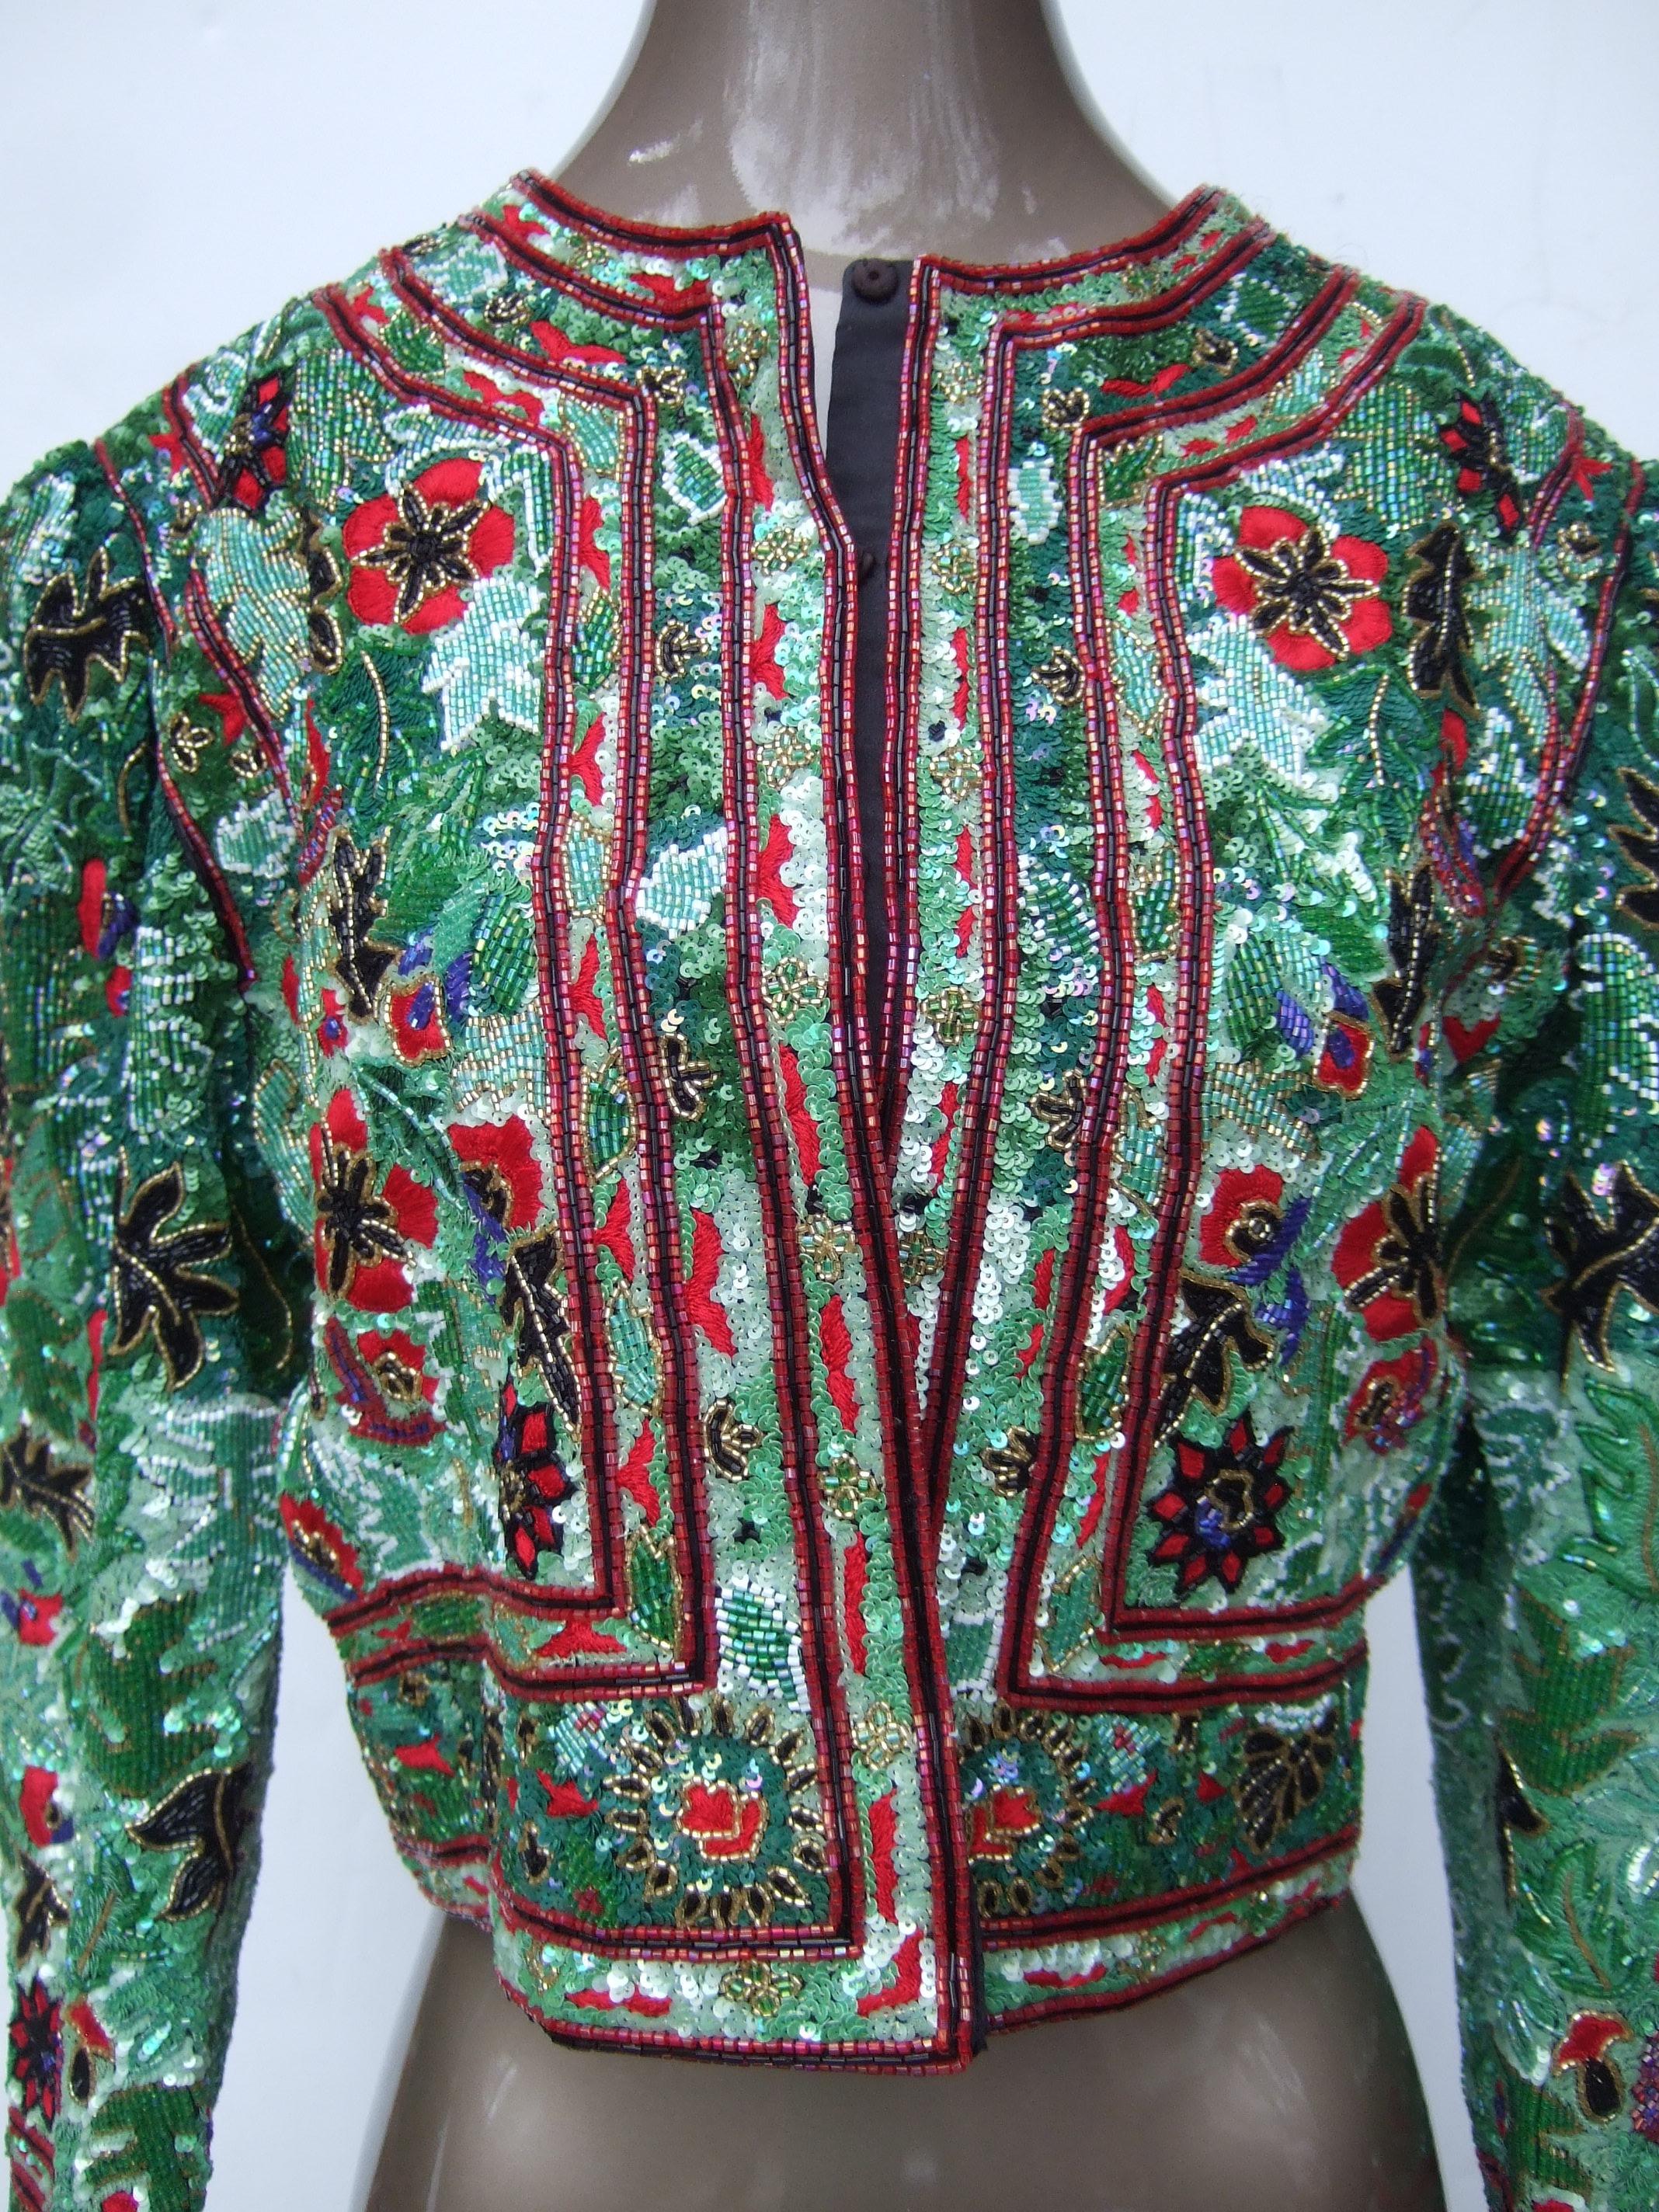 Exquisite Elaborate Glass Floral Beaded Embroidered Bolero Jacket c 1980s For Sale 12